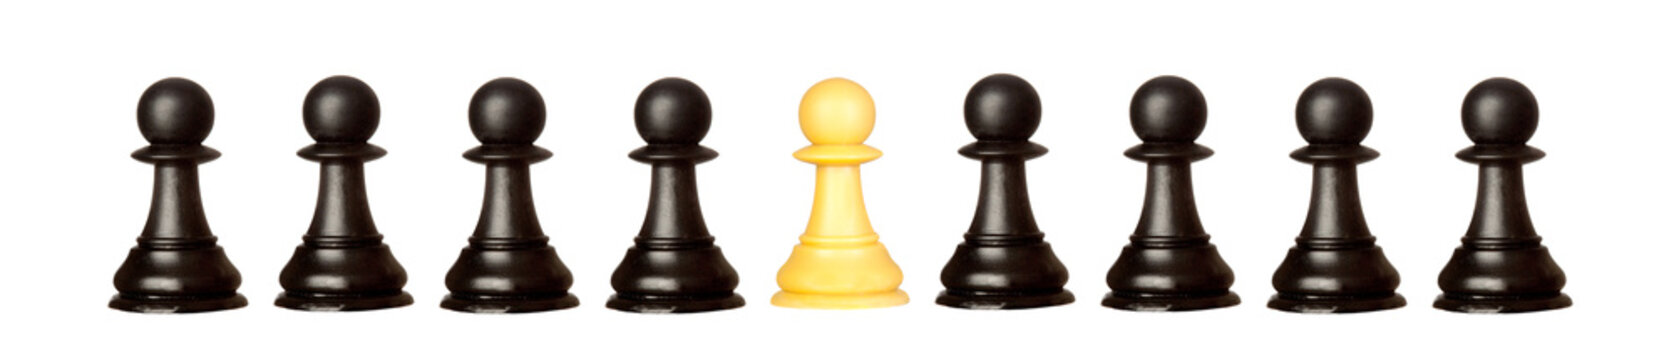 Many pawns black and other one yellow